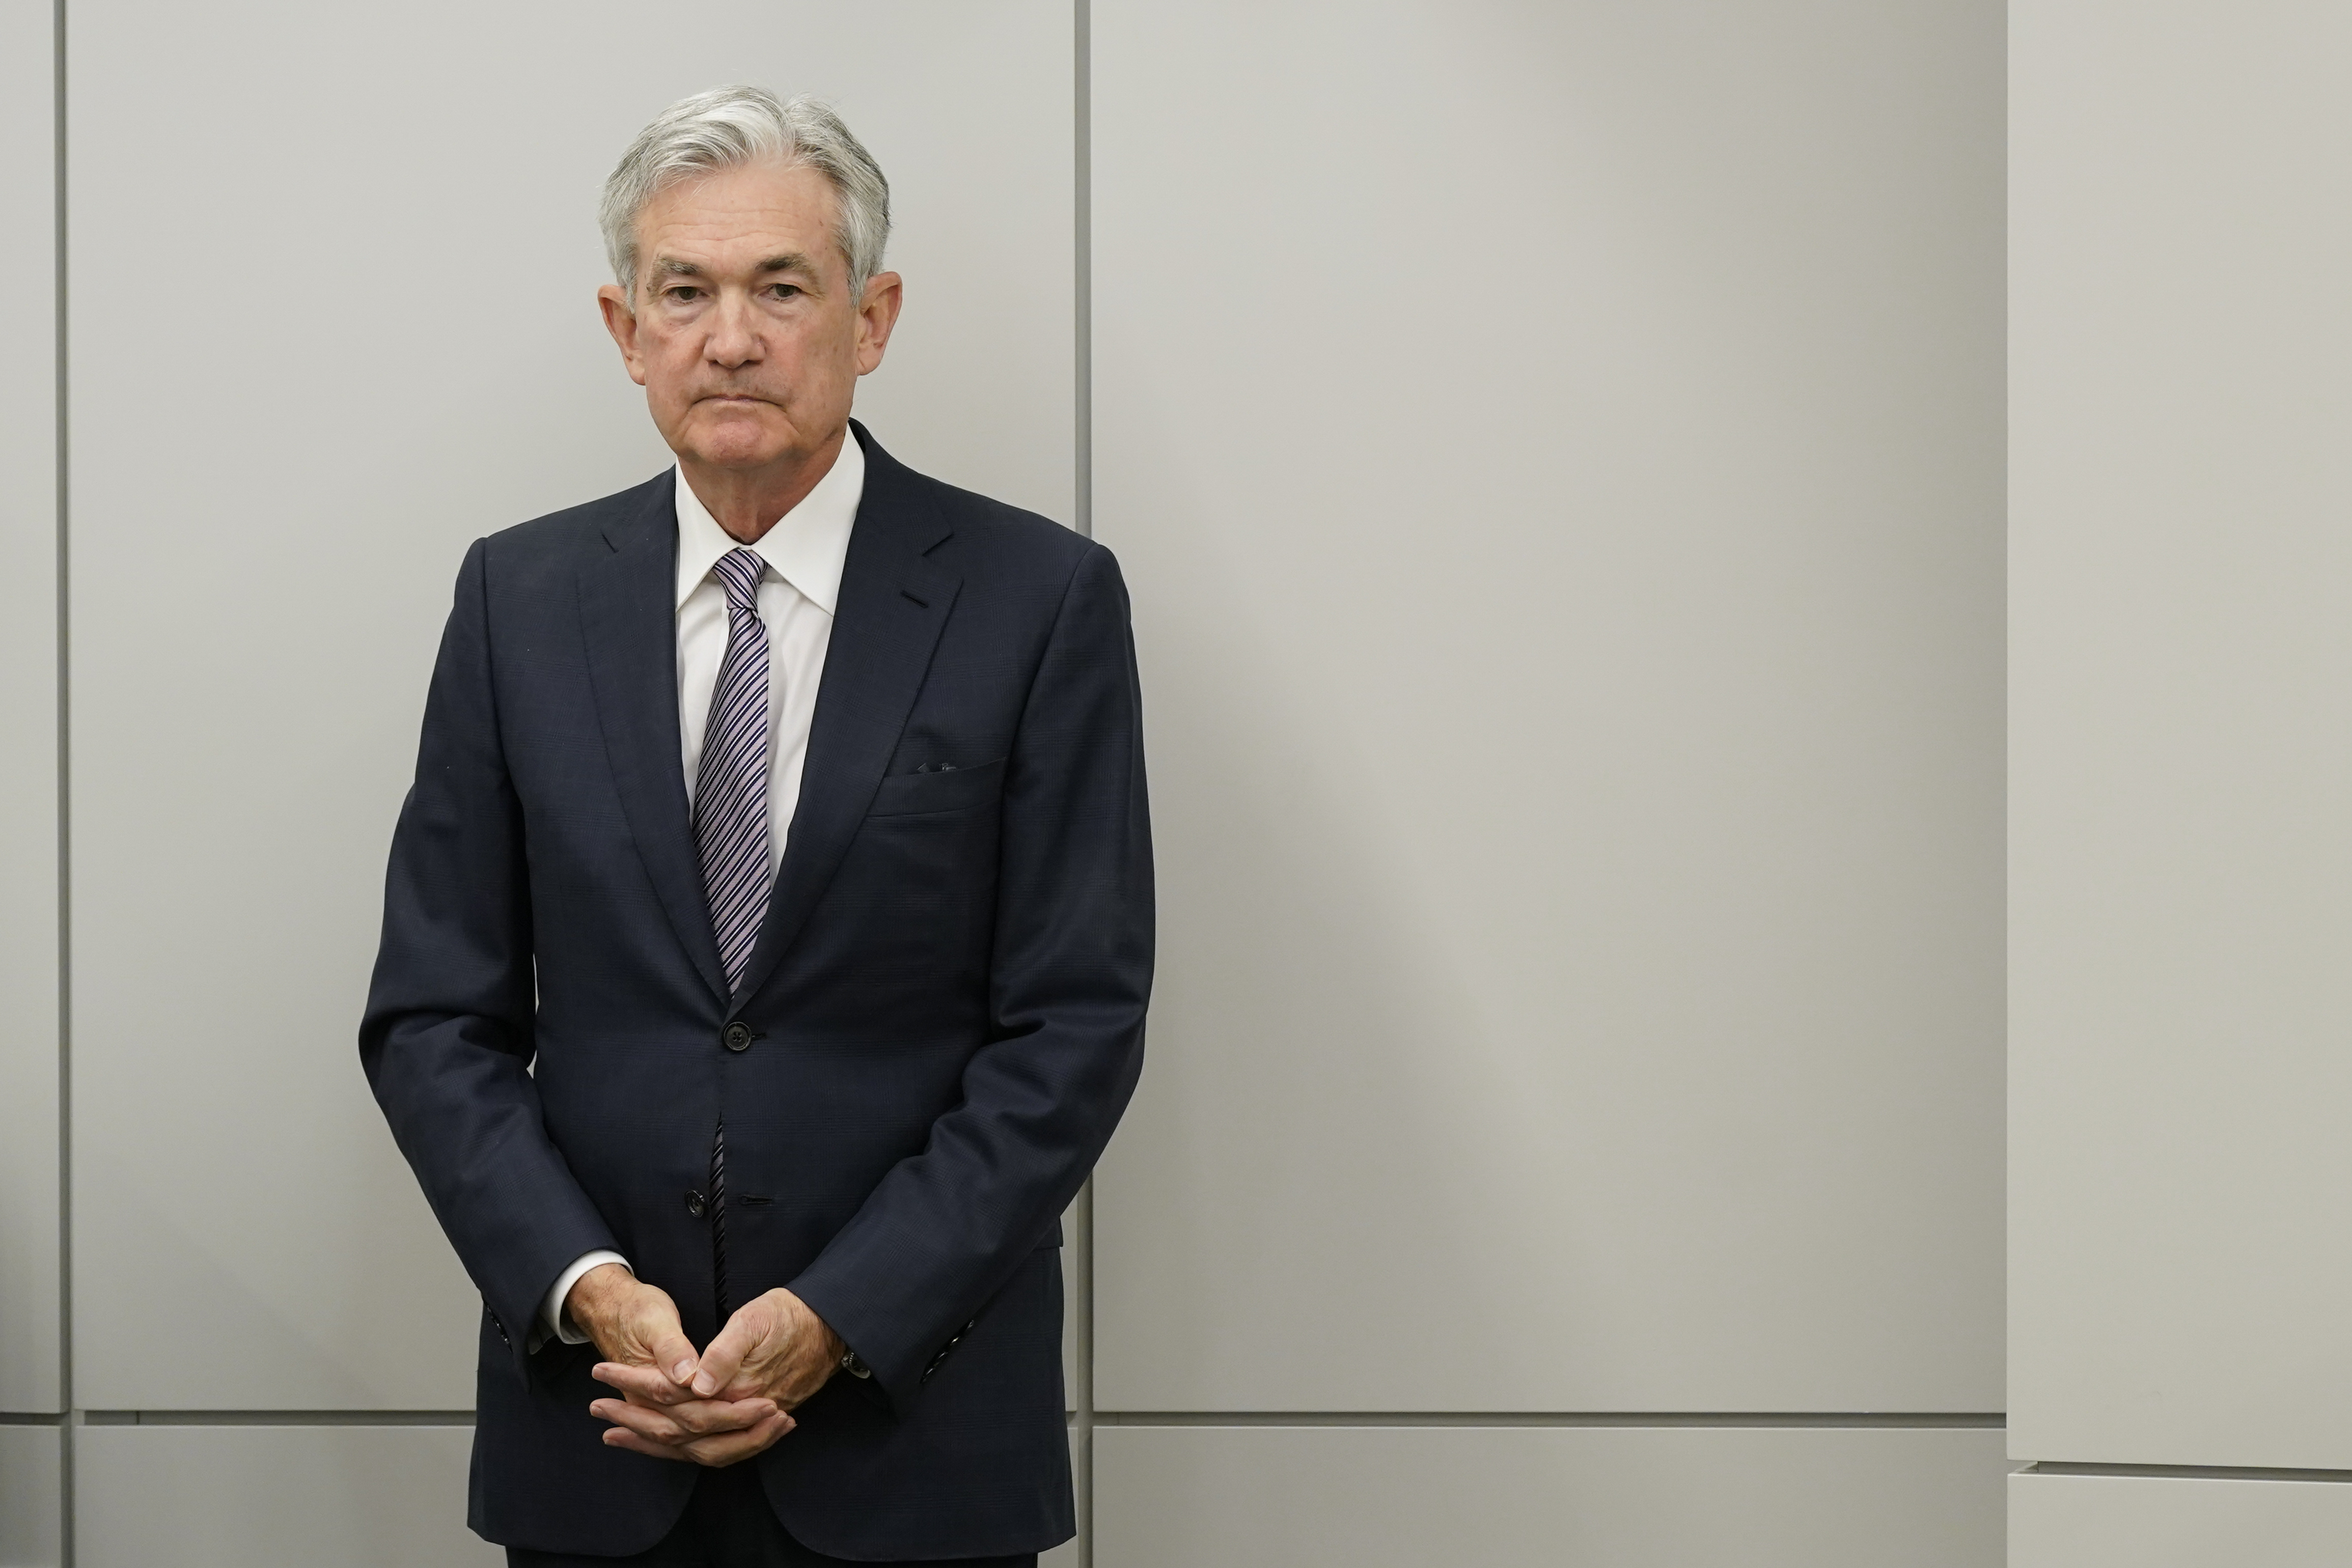 Federal Reserve Chair Jerome Powell is pictured.